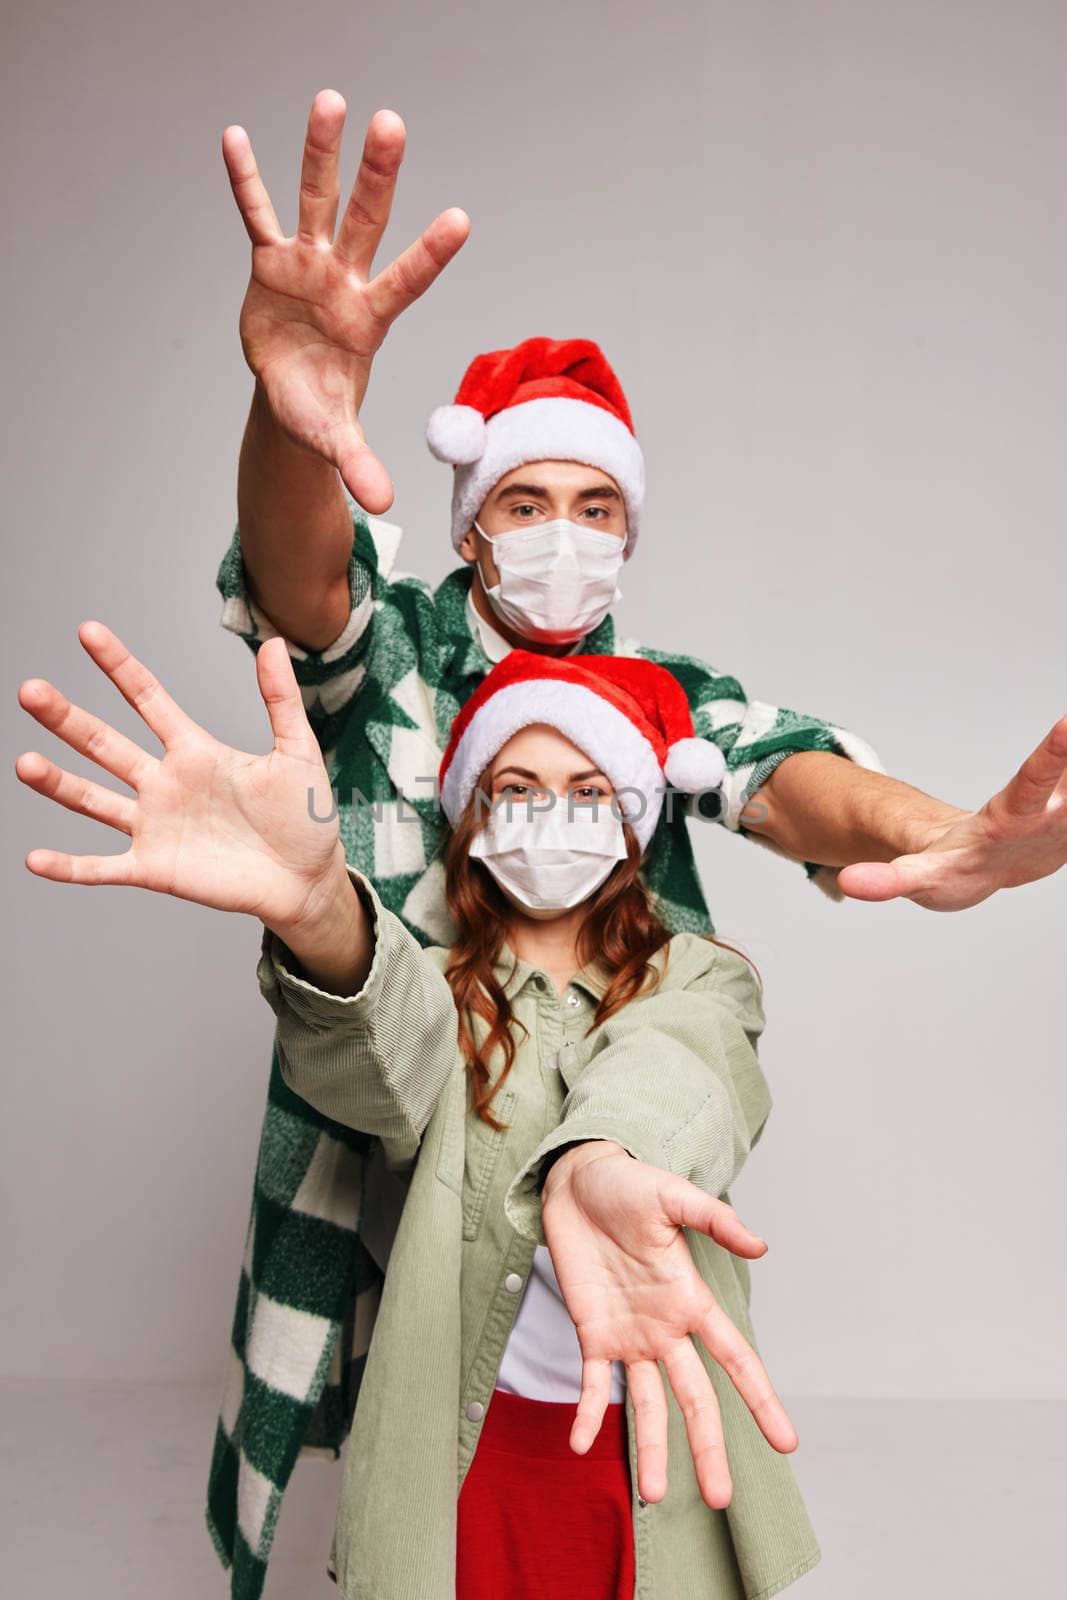 Gesturing hands holiday New Year medical mask fun. High quality photo